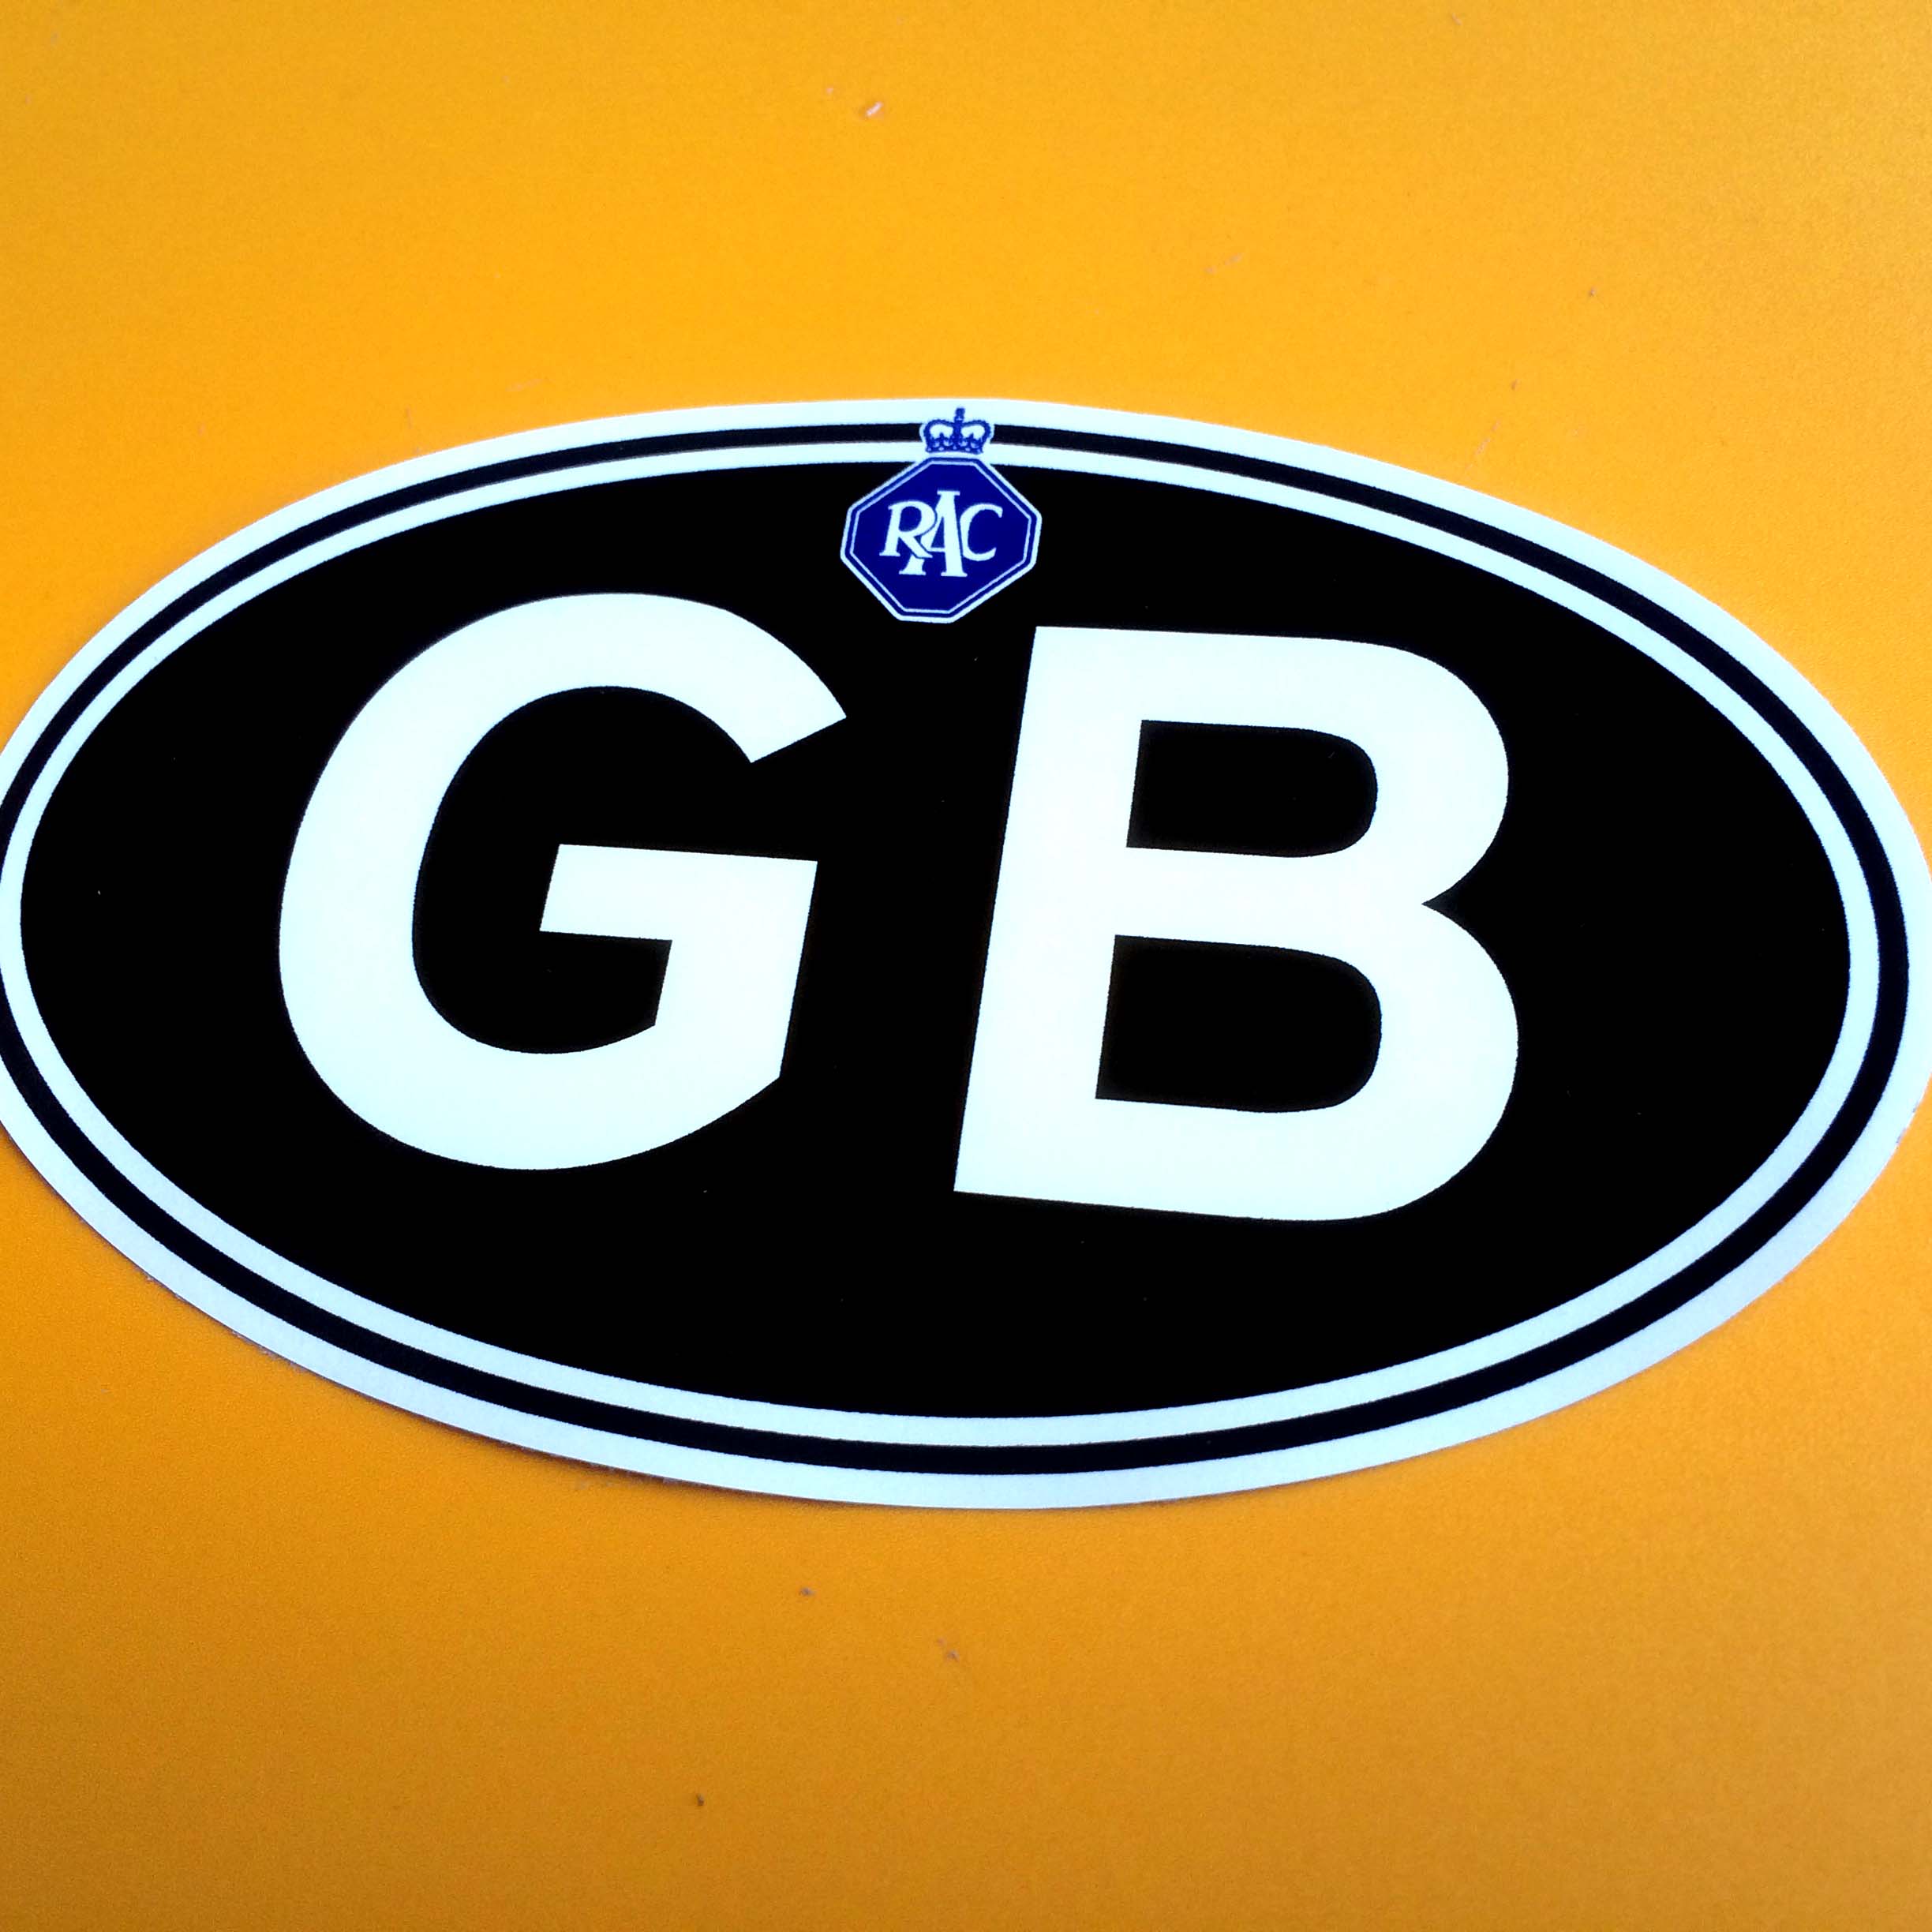 GB RAC GREAT BRITAIN STICKER. GB in bold white lettering on a black oval sticker with a white border. Above GB is the RAC logo - white lettering on a blue octagon topped with a crown.